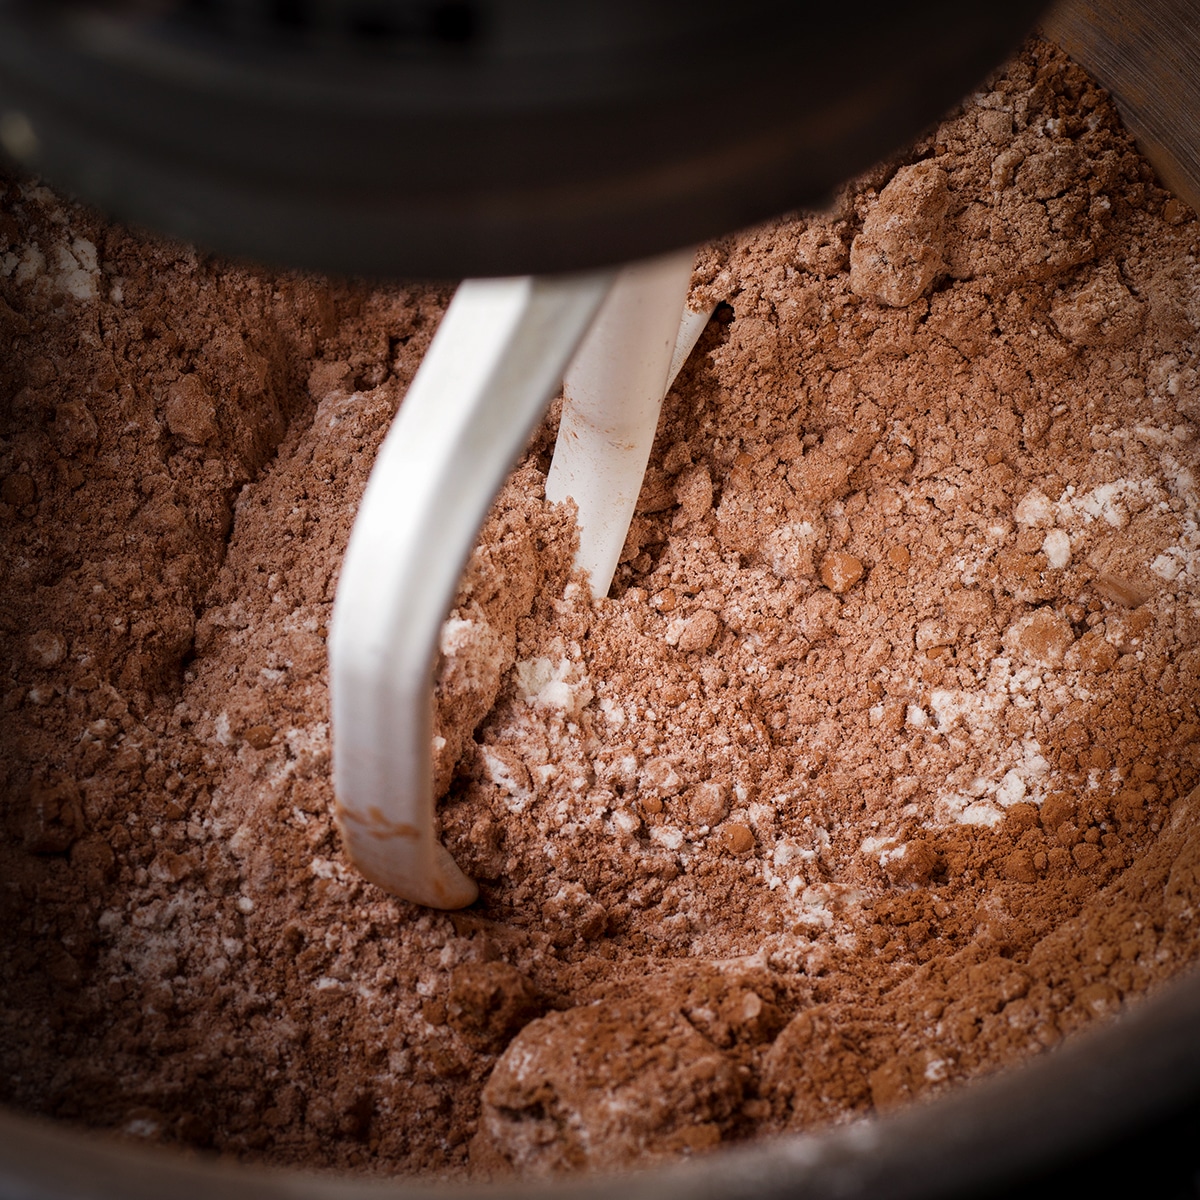 Using the paddle attachment on an electric mixer to blend sugar, flour, cocoa powder, salt, baking powder, and baking soda in a large bowl.